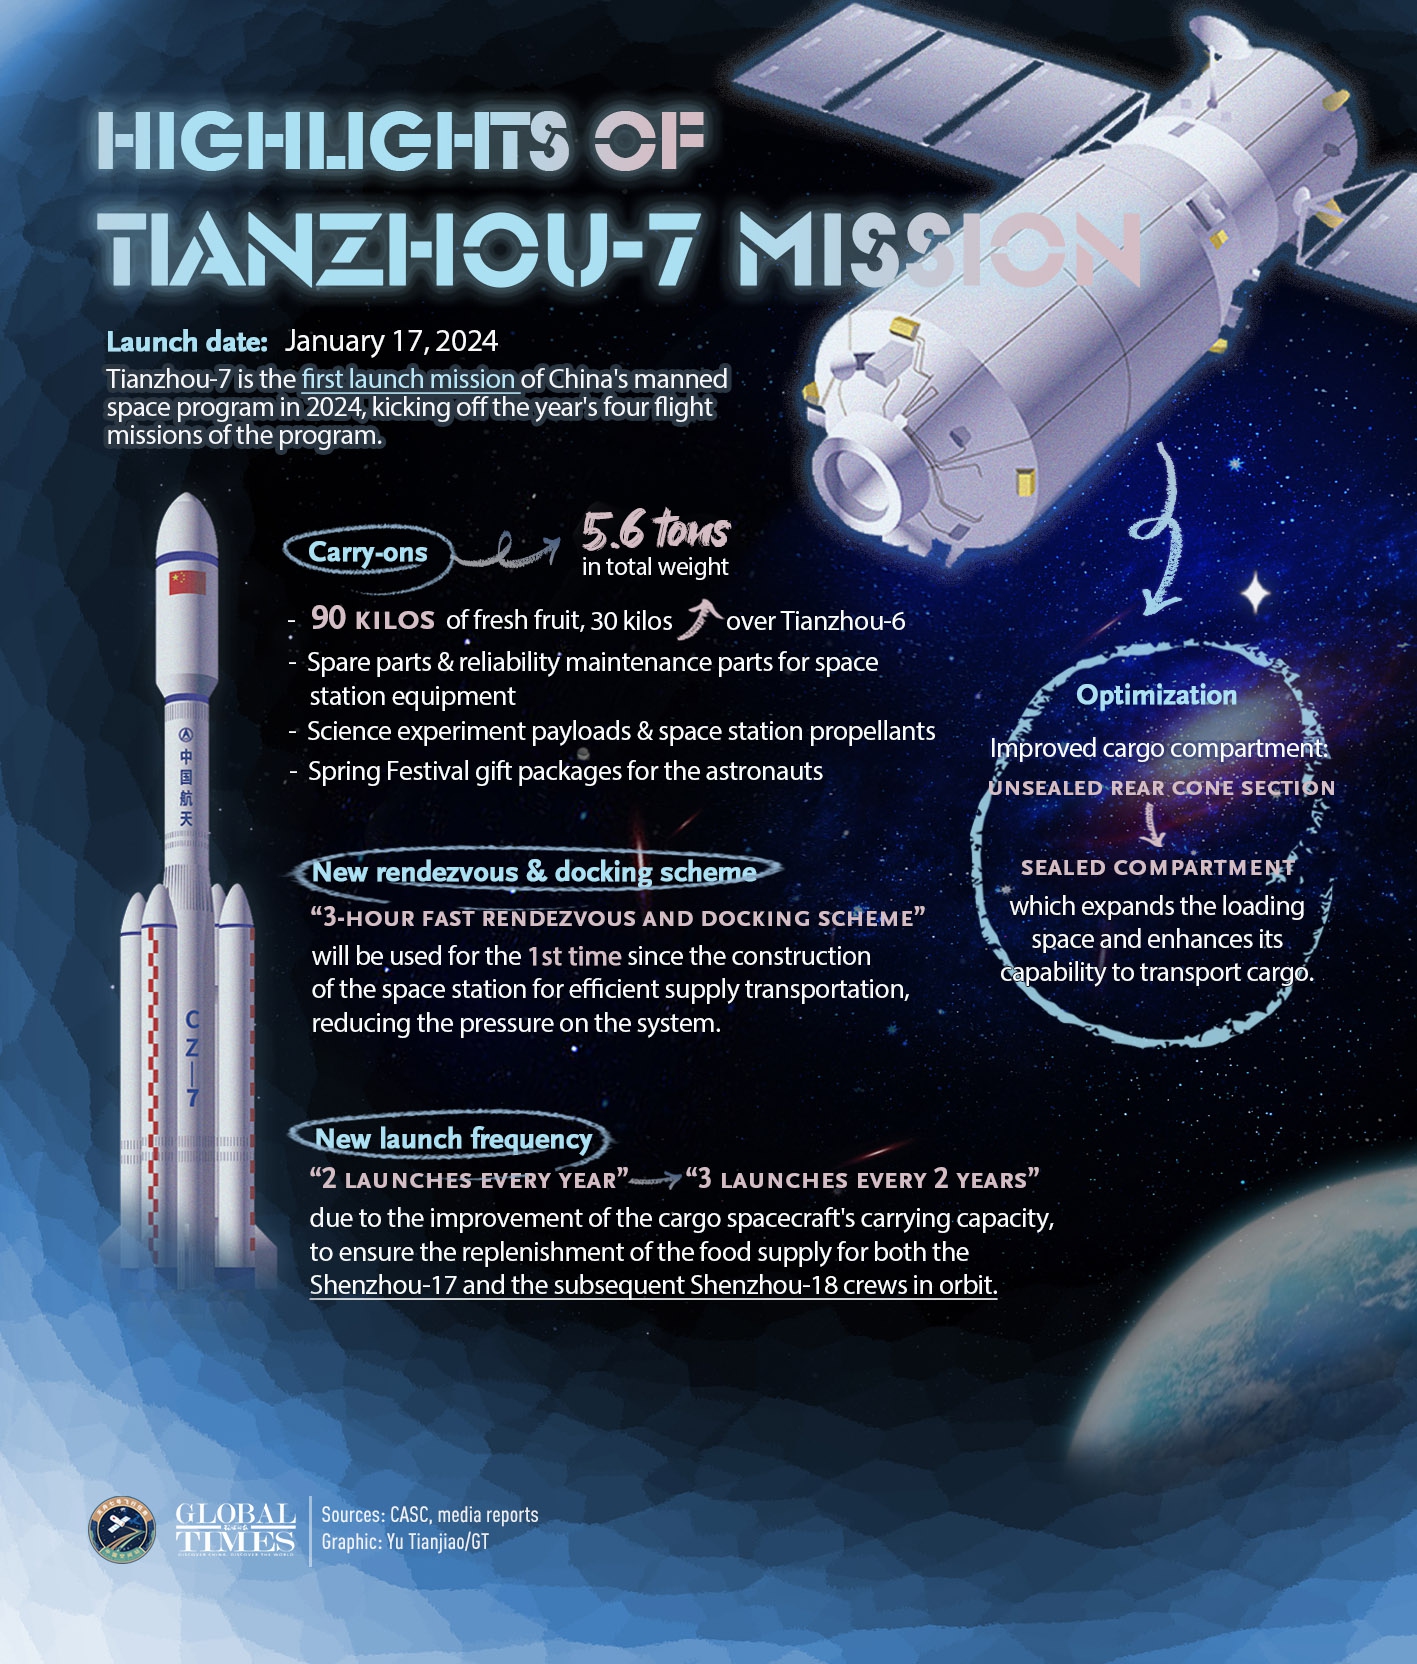 Tianzhou-7 is the first launch mission of China's manned space program in 2024, kicking off the year's four flight missions of the program.